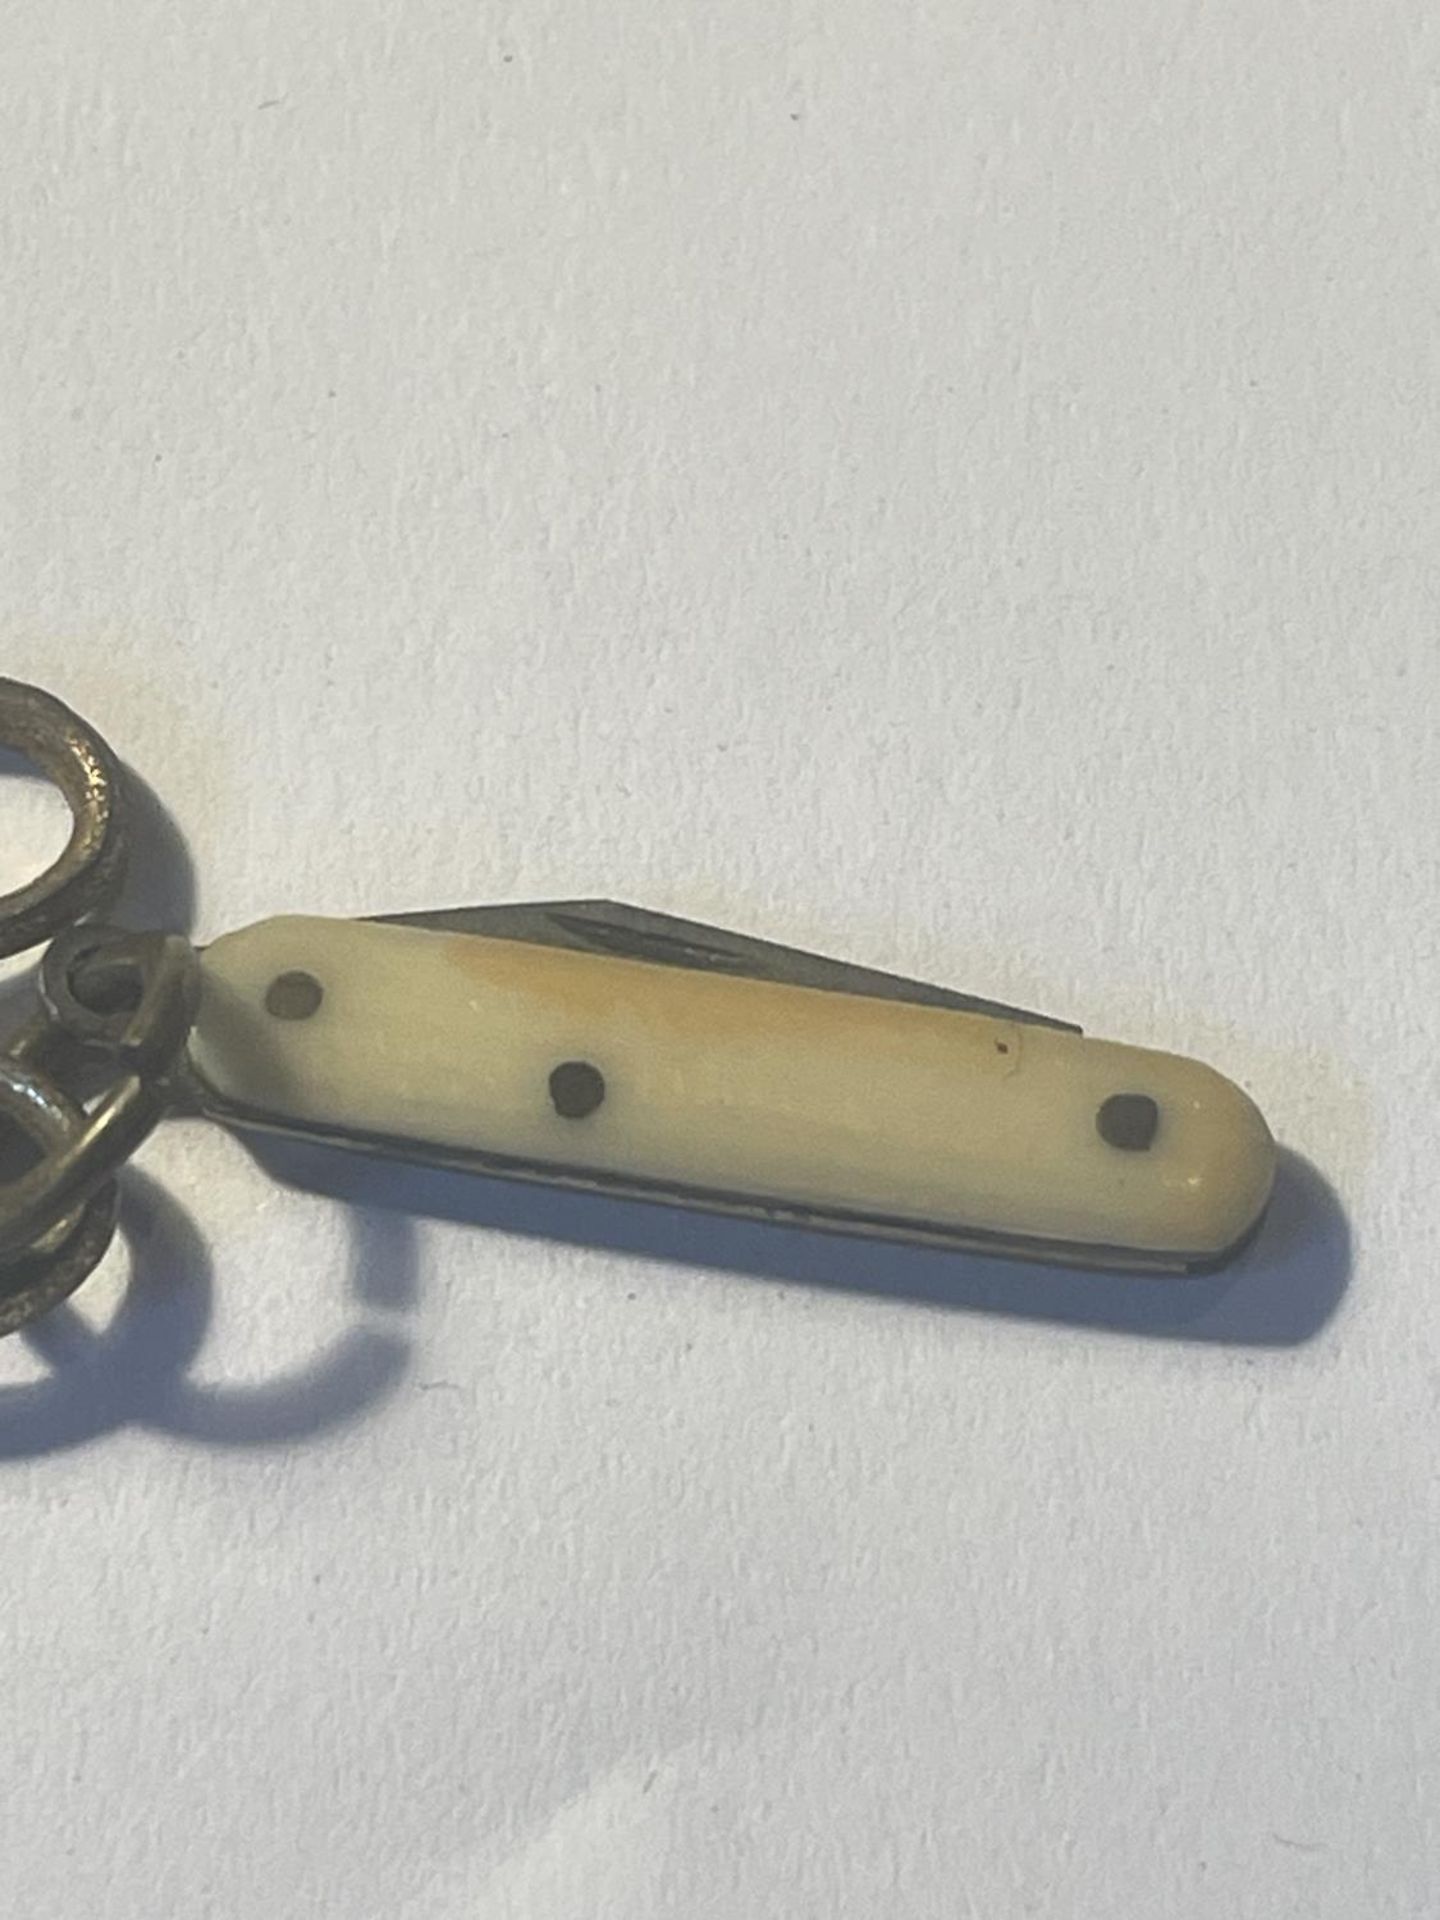 AN ANTIQUE PAIR OF MINIATURE SCISSORS IN A STORK DESIGN AND PEN KNIFE WITH A BROWN CASE LABELLED - Image 3 of 4